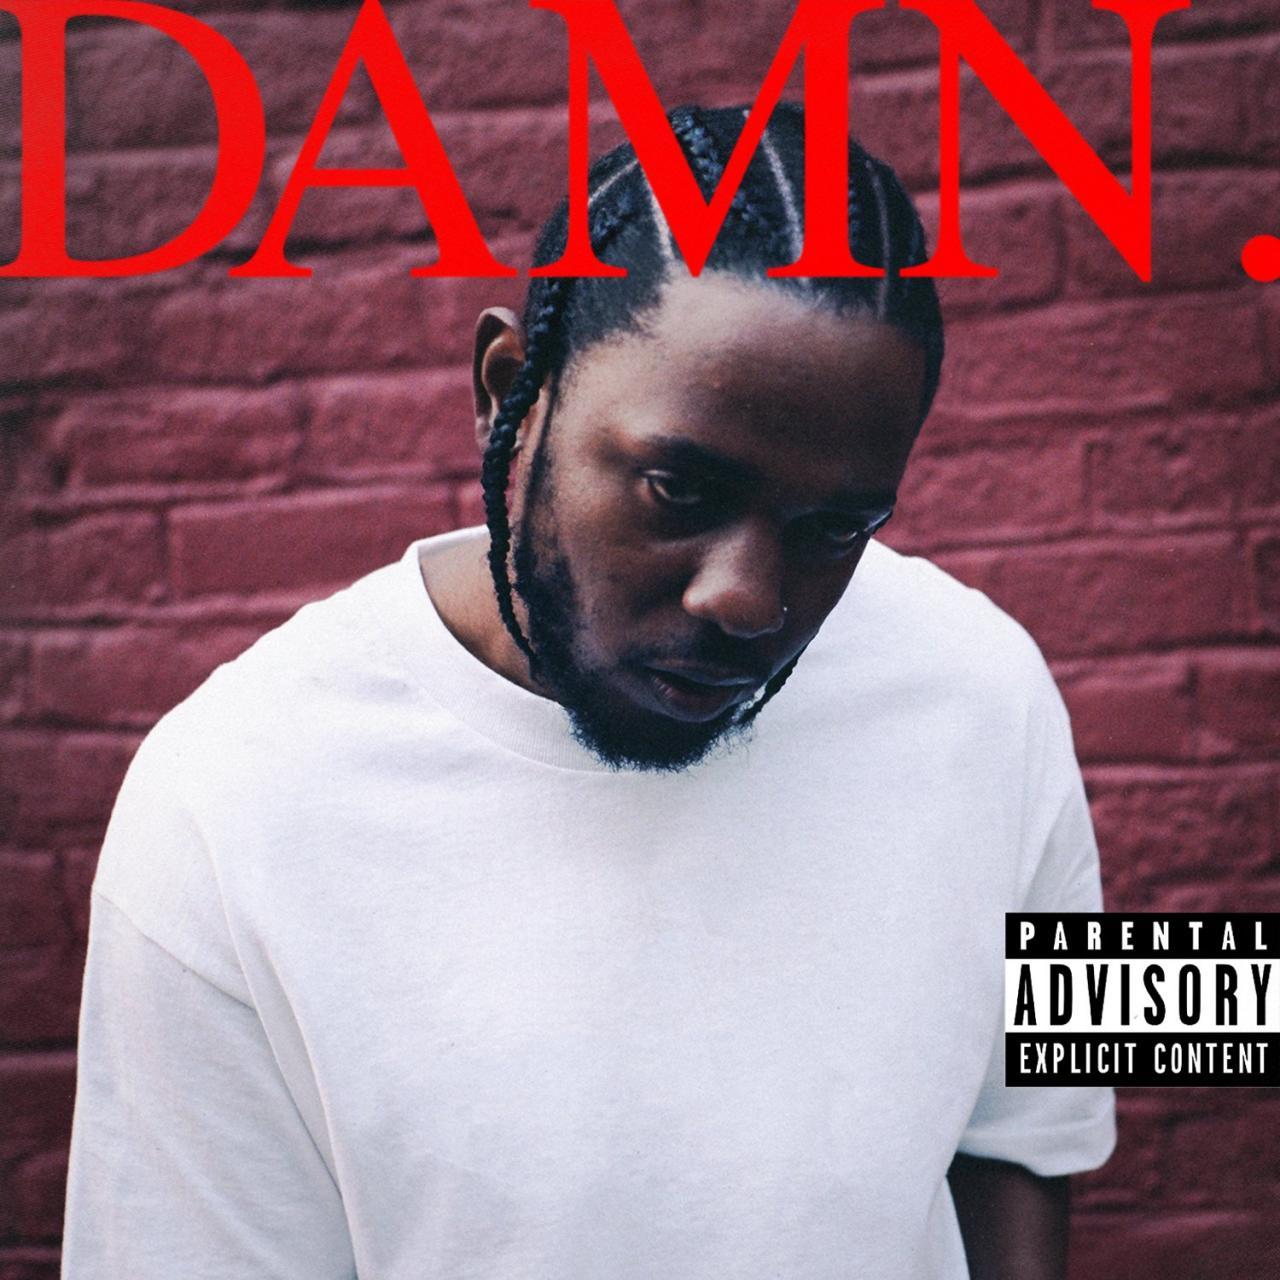 See The Full Booklet & Production Credits For Kendrick Lamar’s New Album ‘DAMN.’